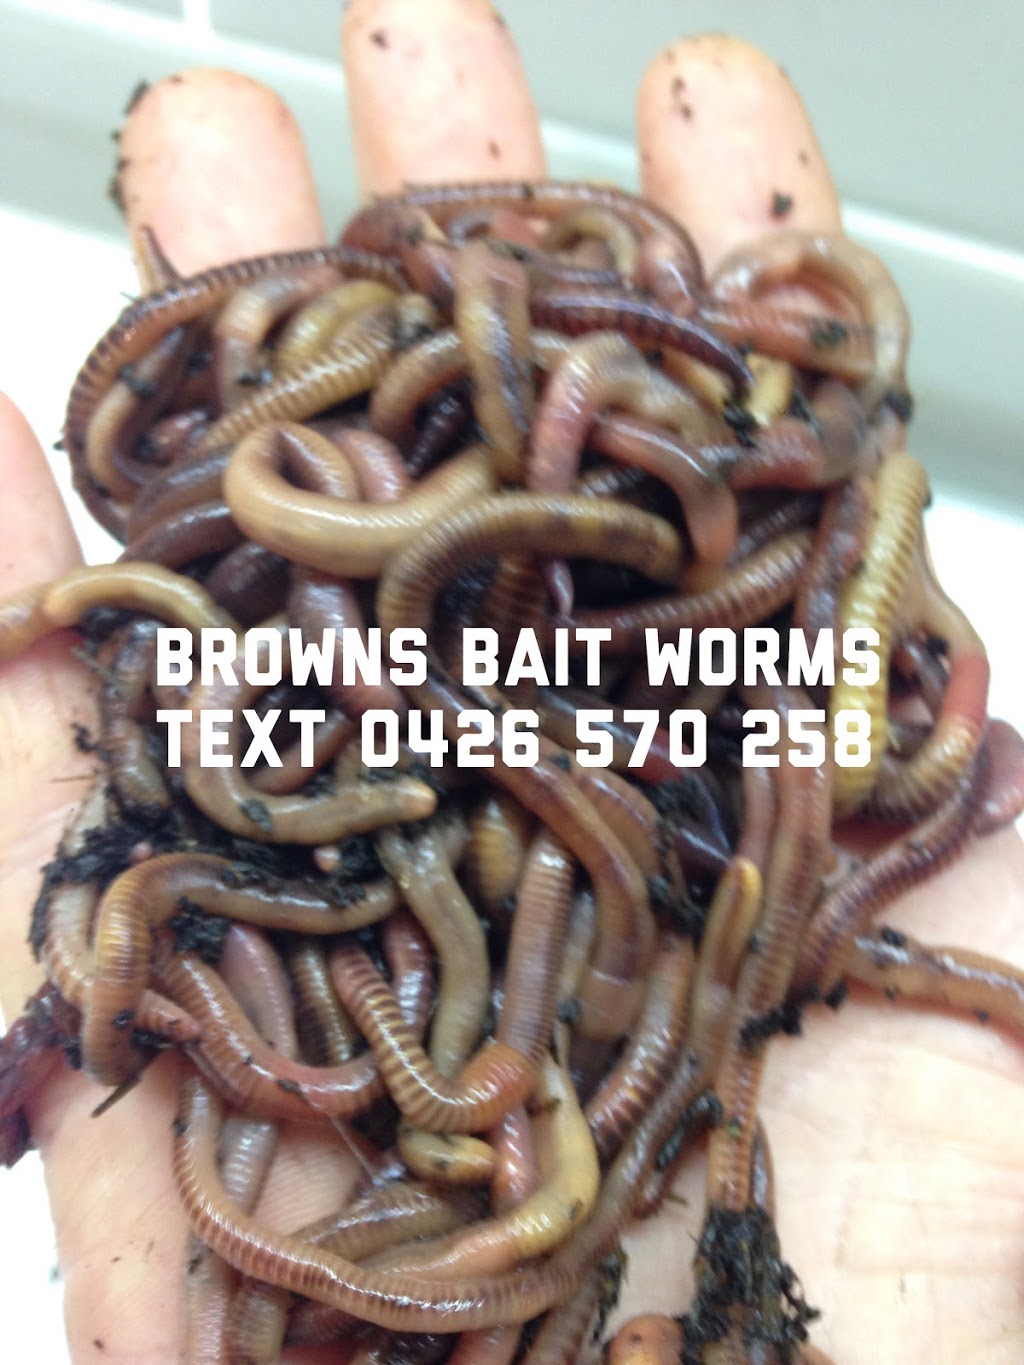 Browns compost worms | store | 48 Milne St, Crib Point VIC 3919, Australia | 0426570258 OR +61 426 570 258